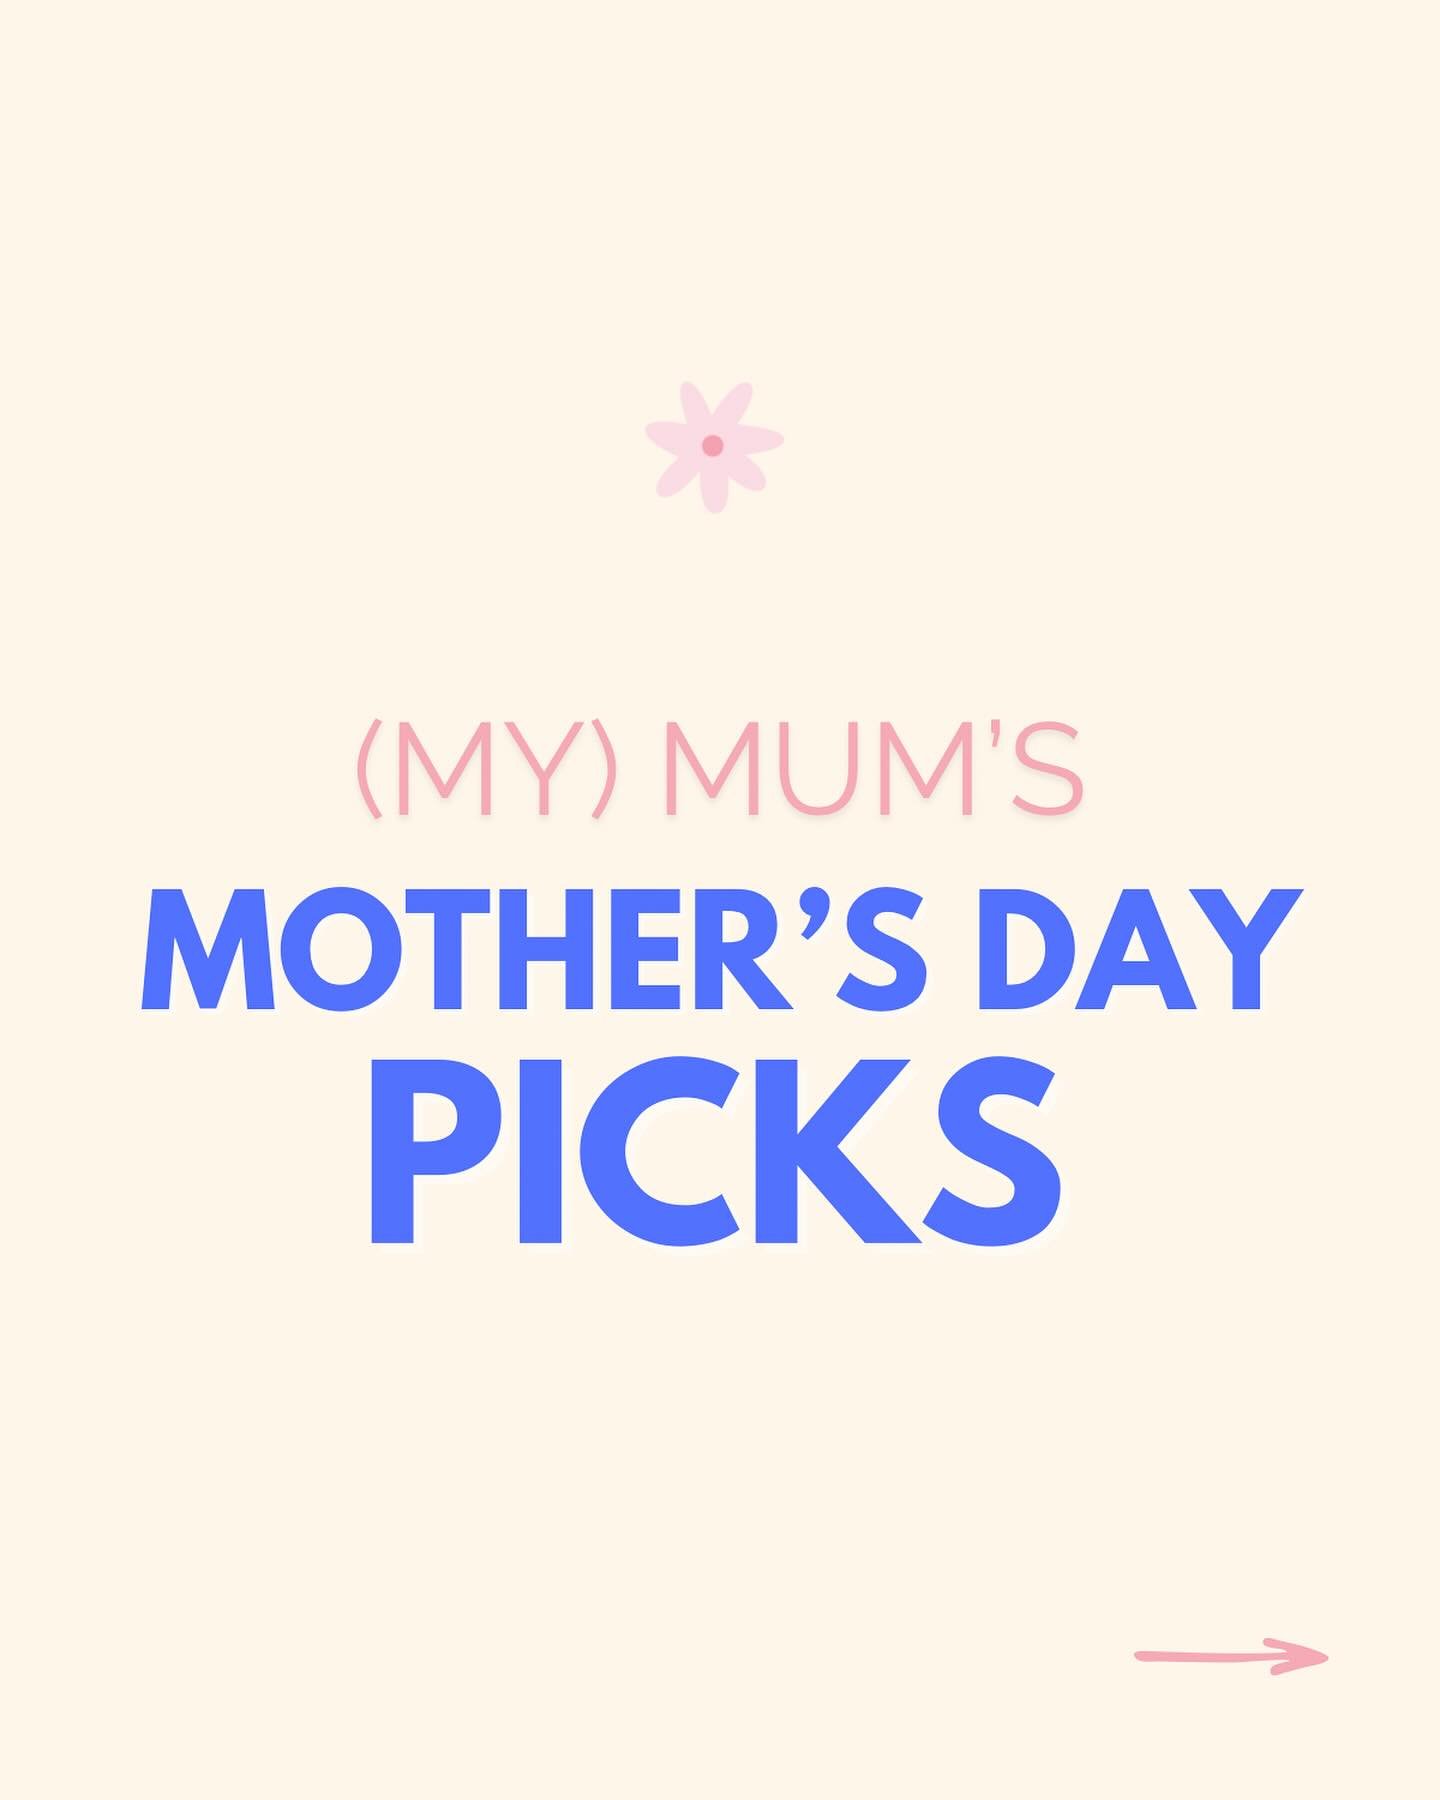 Each year in the lead up to Mother&rsquo;s Day my mum picks a few pieces from my online store that she thinks would make great gifts. 

This year&rsquo;s picks are comprised of lovely texture, vibrant colour and childhood nostalgia. 

If you&rsquo;re